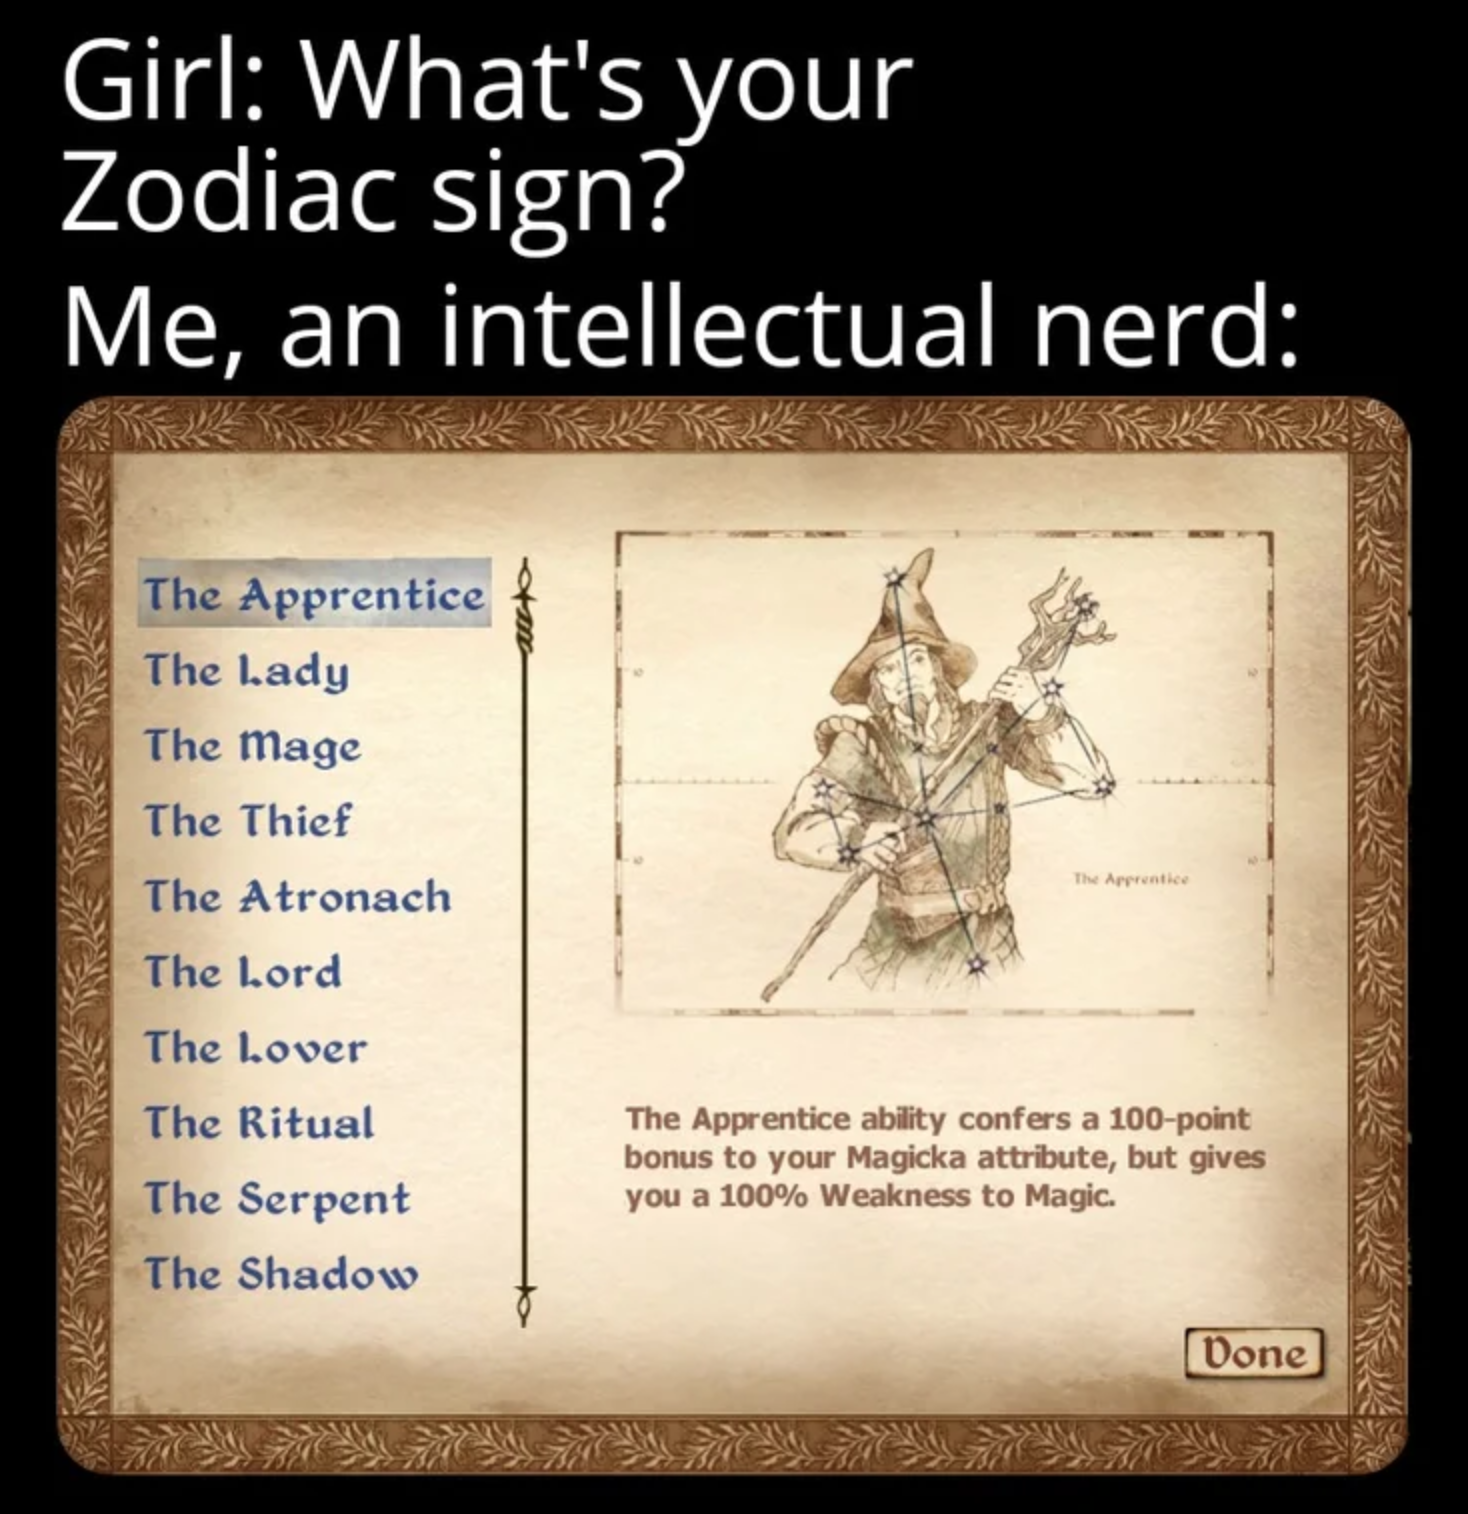 gaming memes and pics - oblivion - Girl What's your Zodiac sign? Me, an intellectual nerd The Apprentice The Lady The Mage The Thief The Atronach The Lord The Lover The Ritual The Serpent The Shadow The Apprentice ability confers a 100point bonus to your